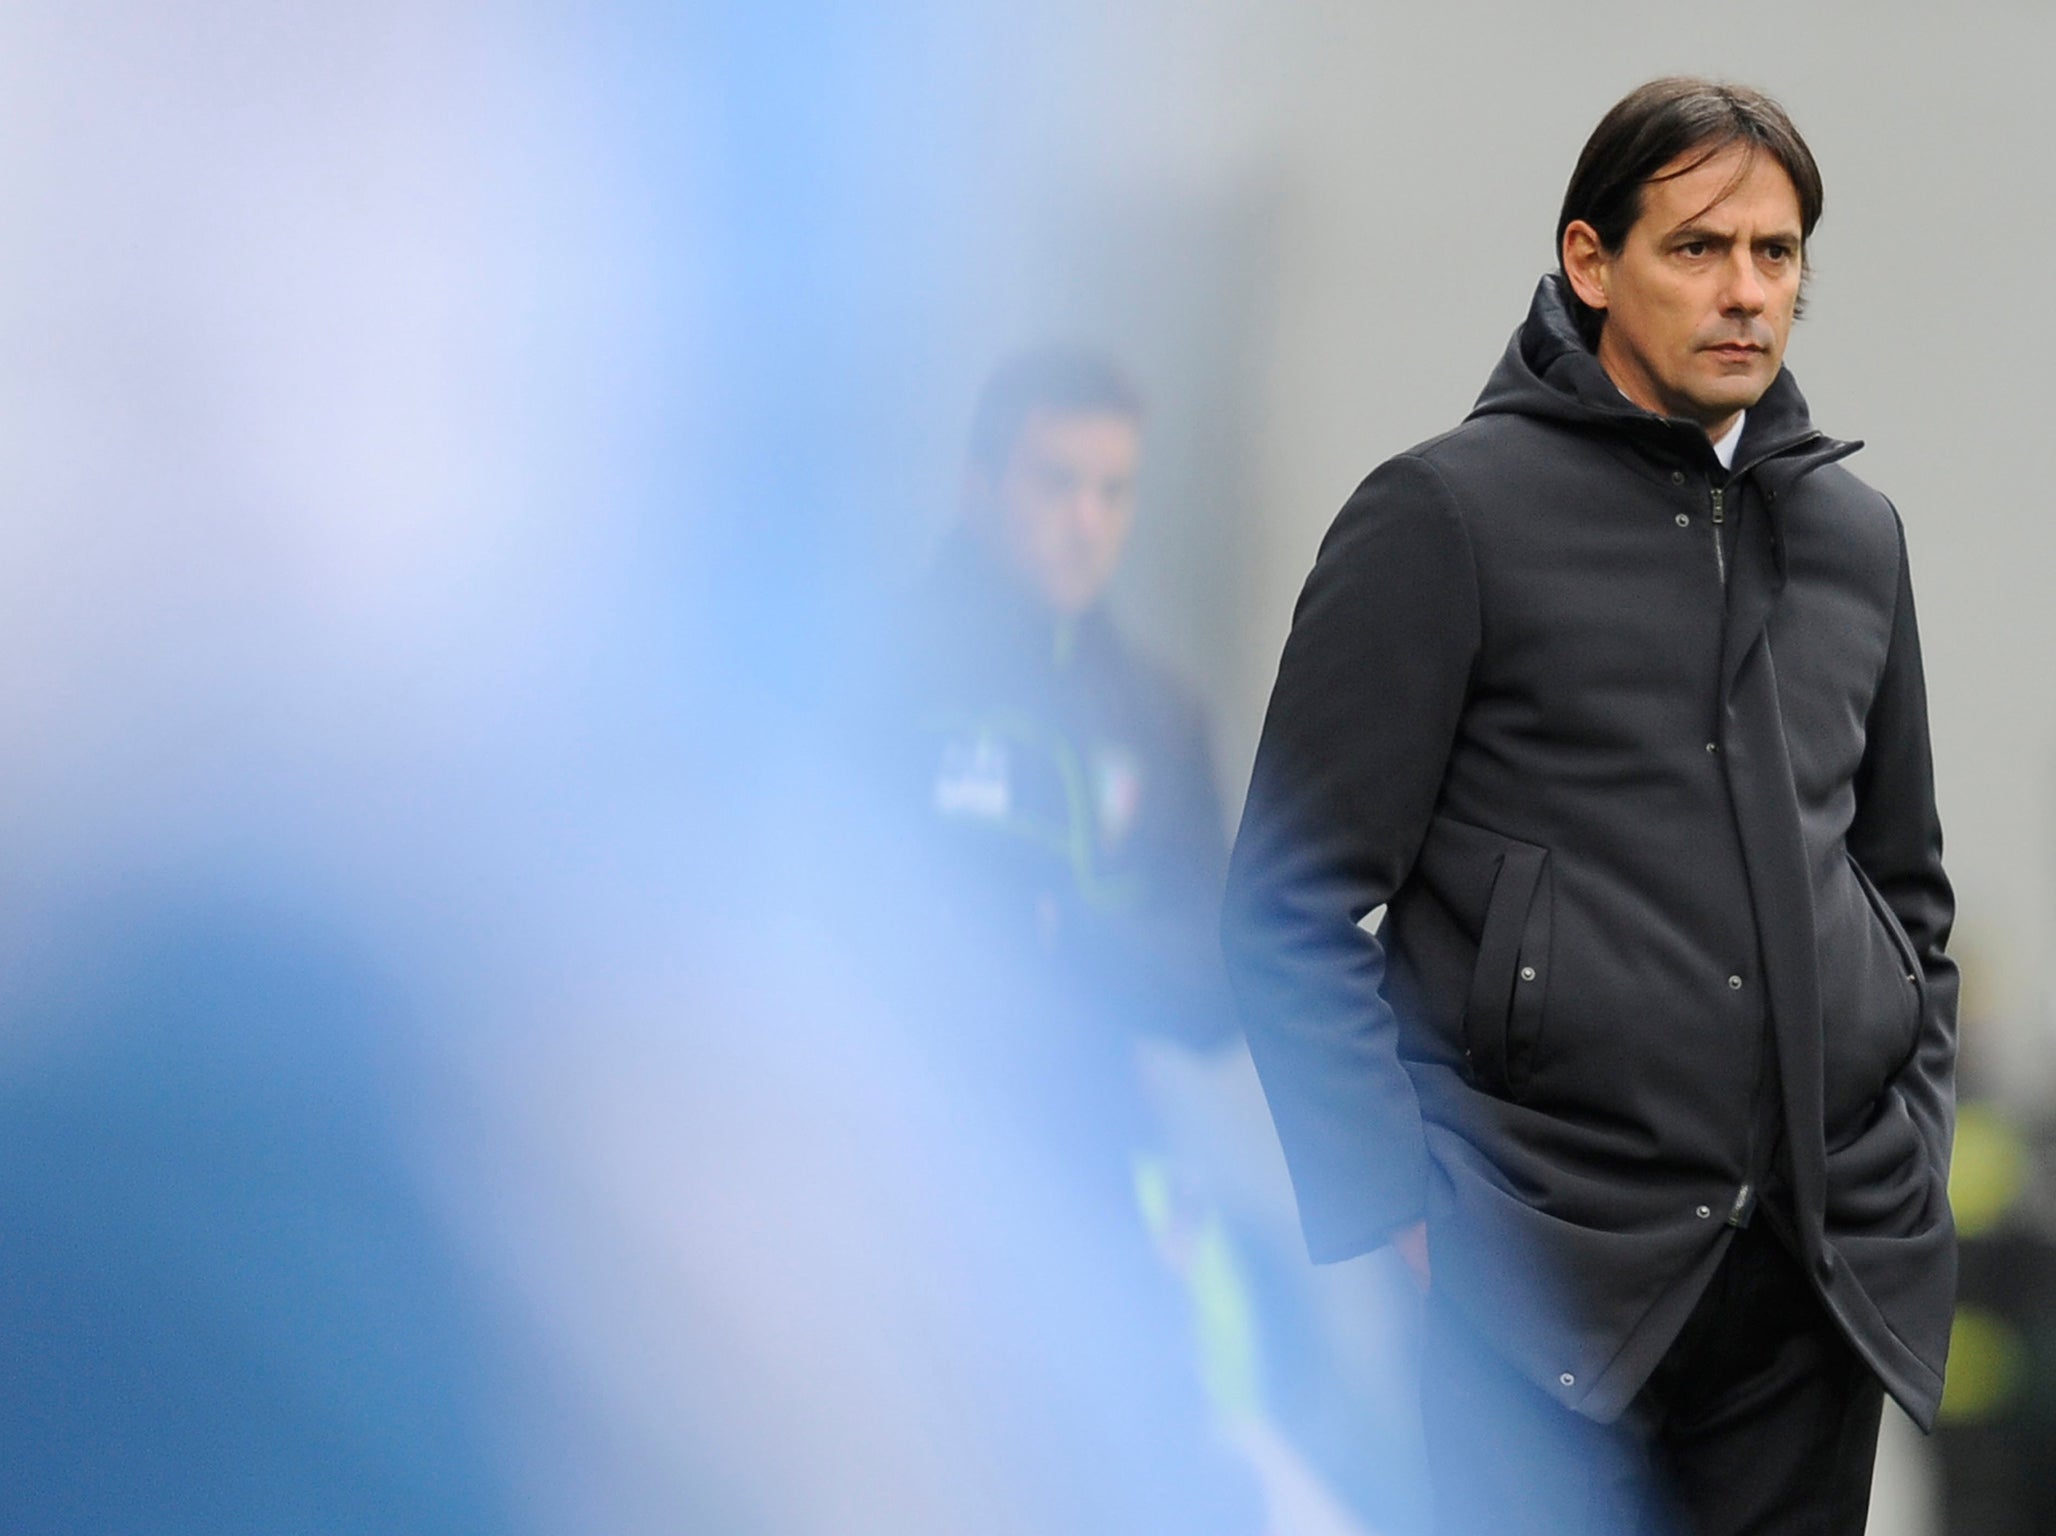 Simone Inzaghi is not a fan